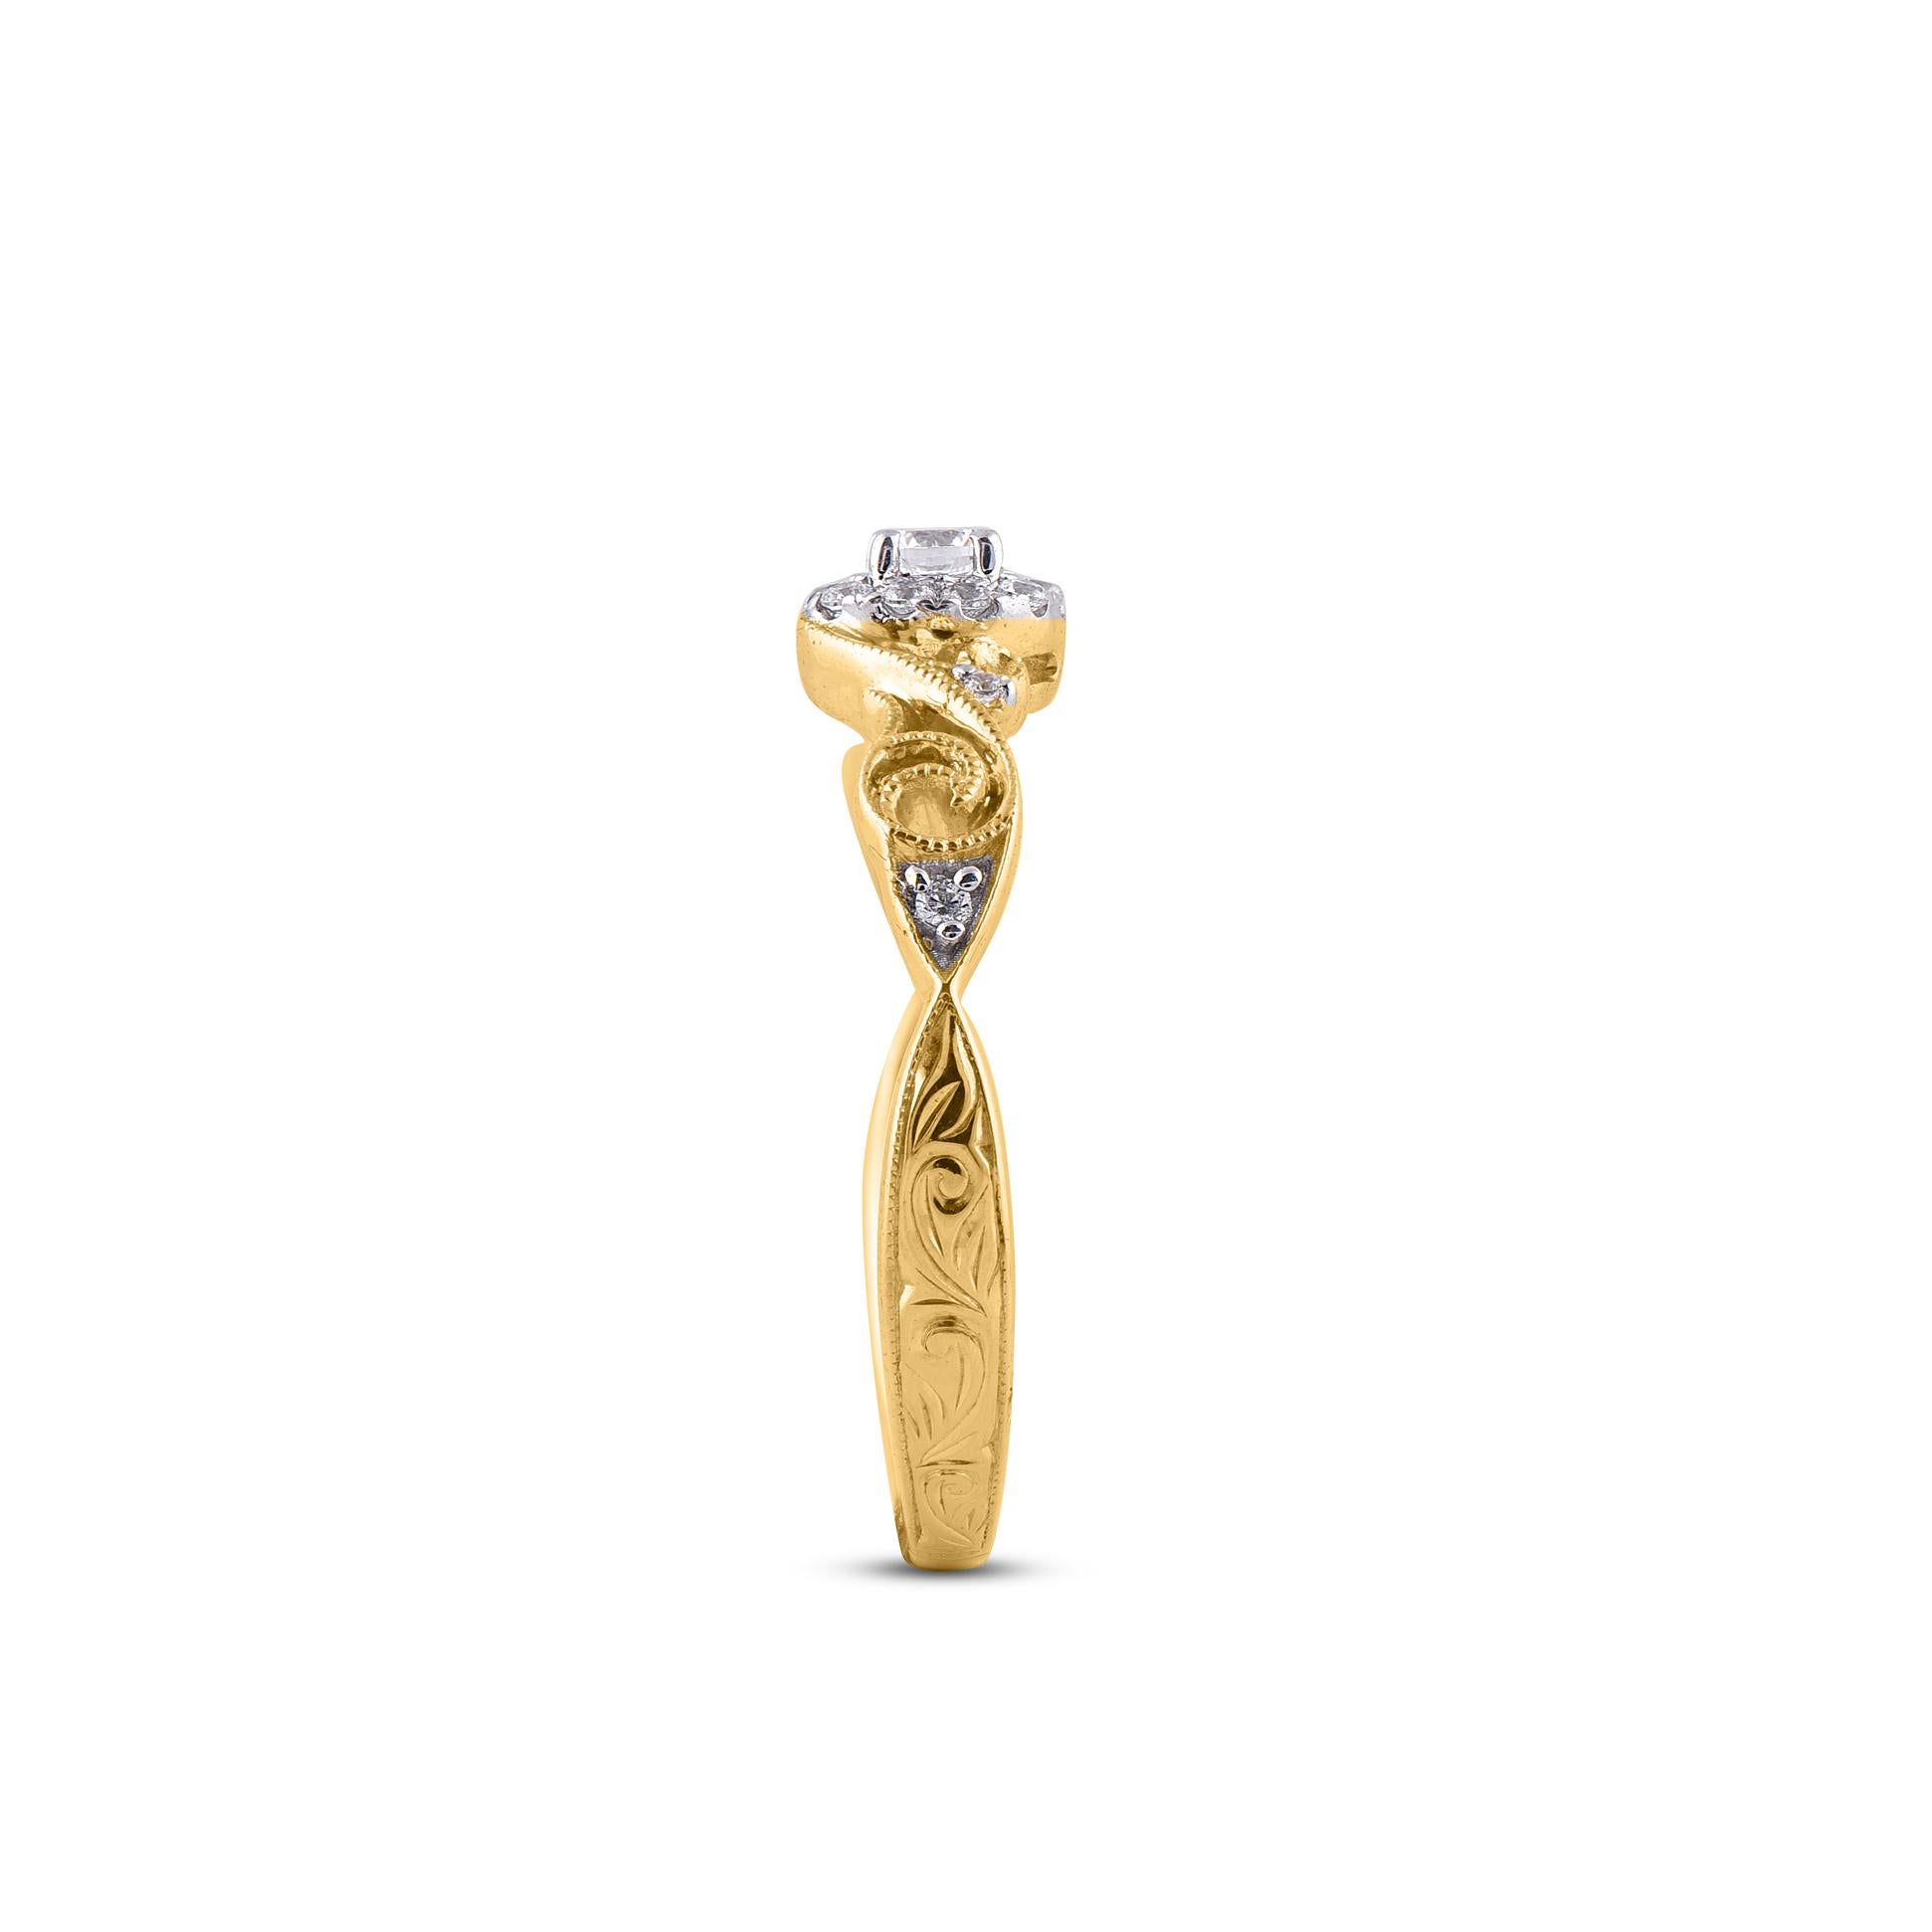 Round Cut TJD 0.21 Carat Brilliant Cut Diamond 14KT Yellow Gold Vintage Engagement Ring For Sale